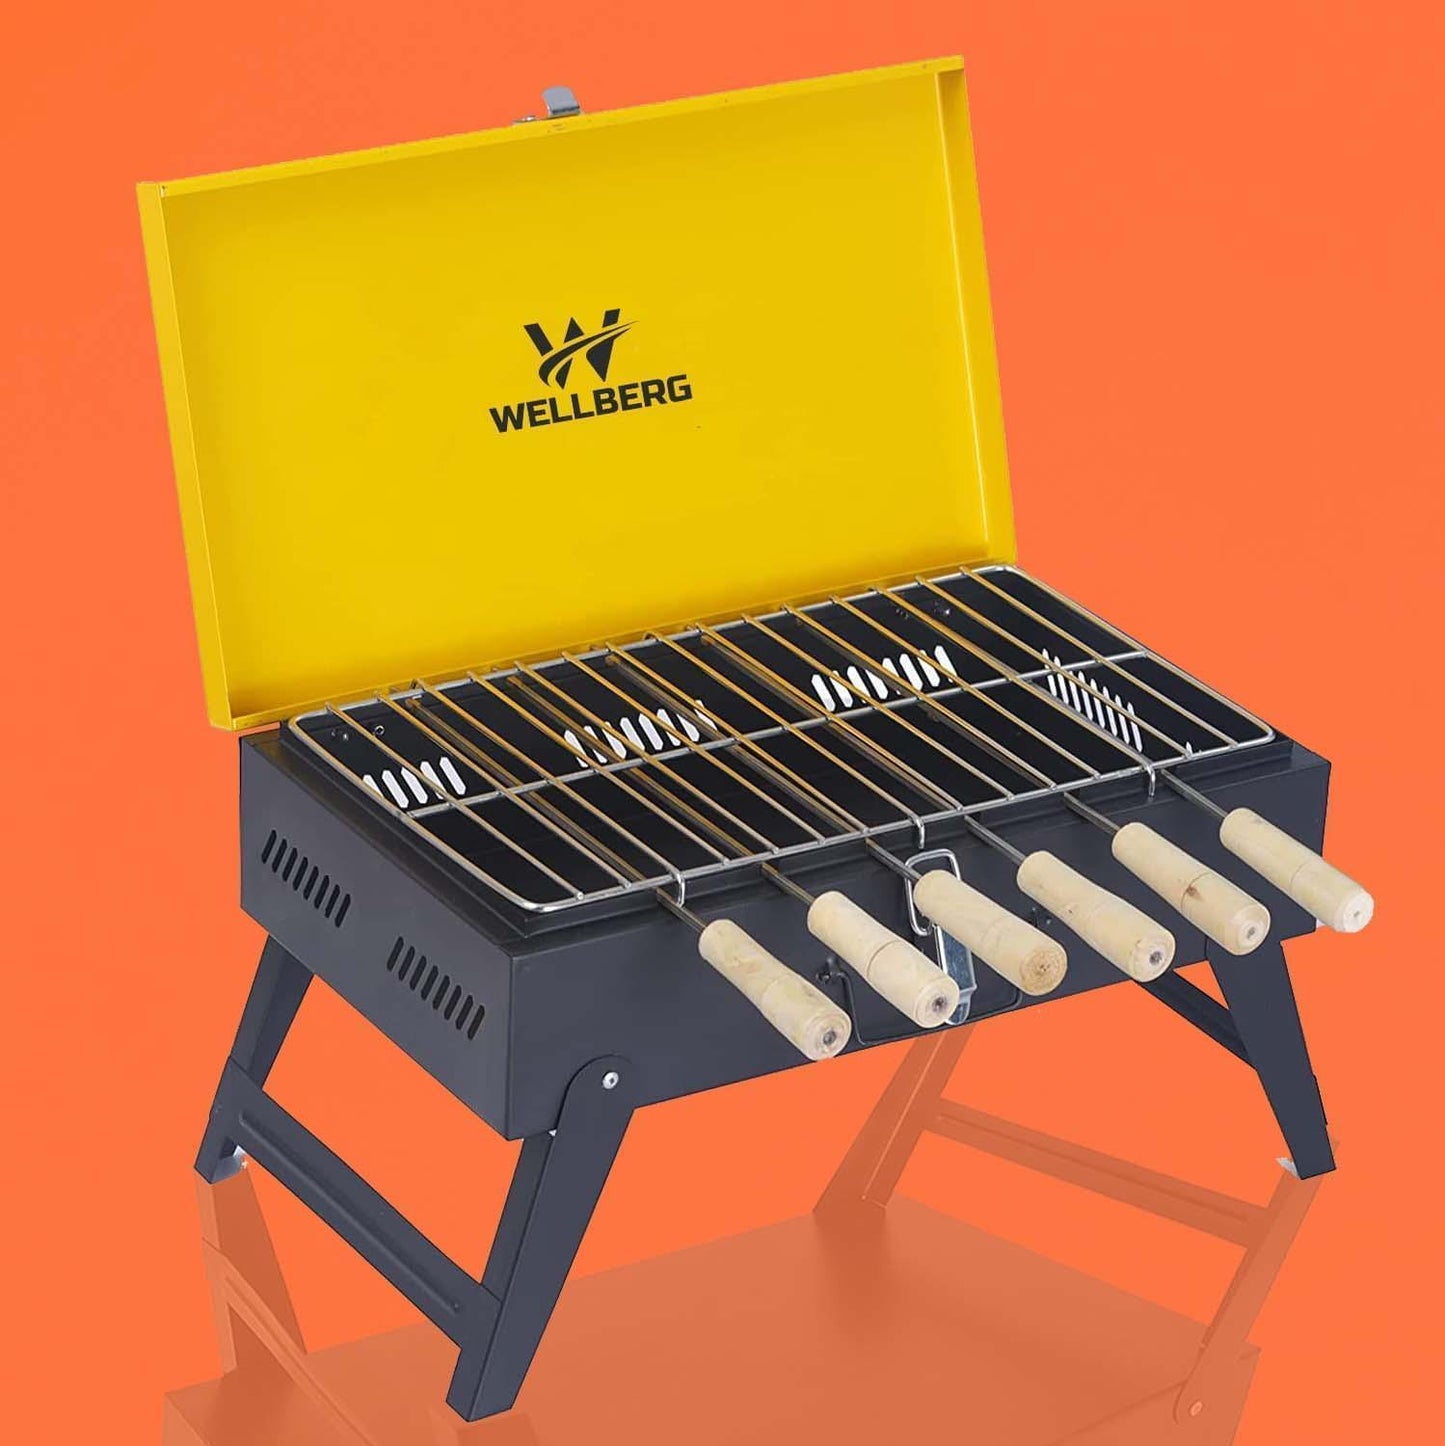 Wellberg Briefcase Charcoal Barbecue Grill with 8 skewers, 1 Grill, 1 Tong (Yellow) - WELLBERG